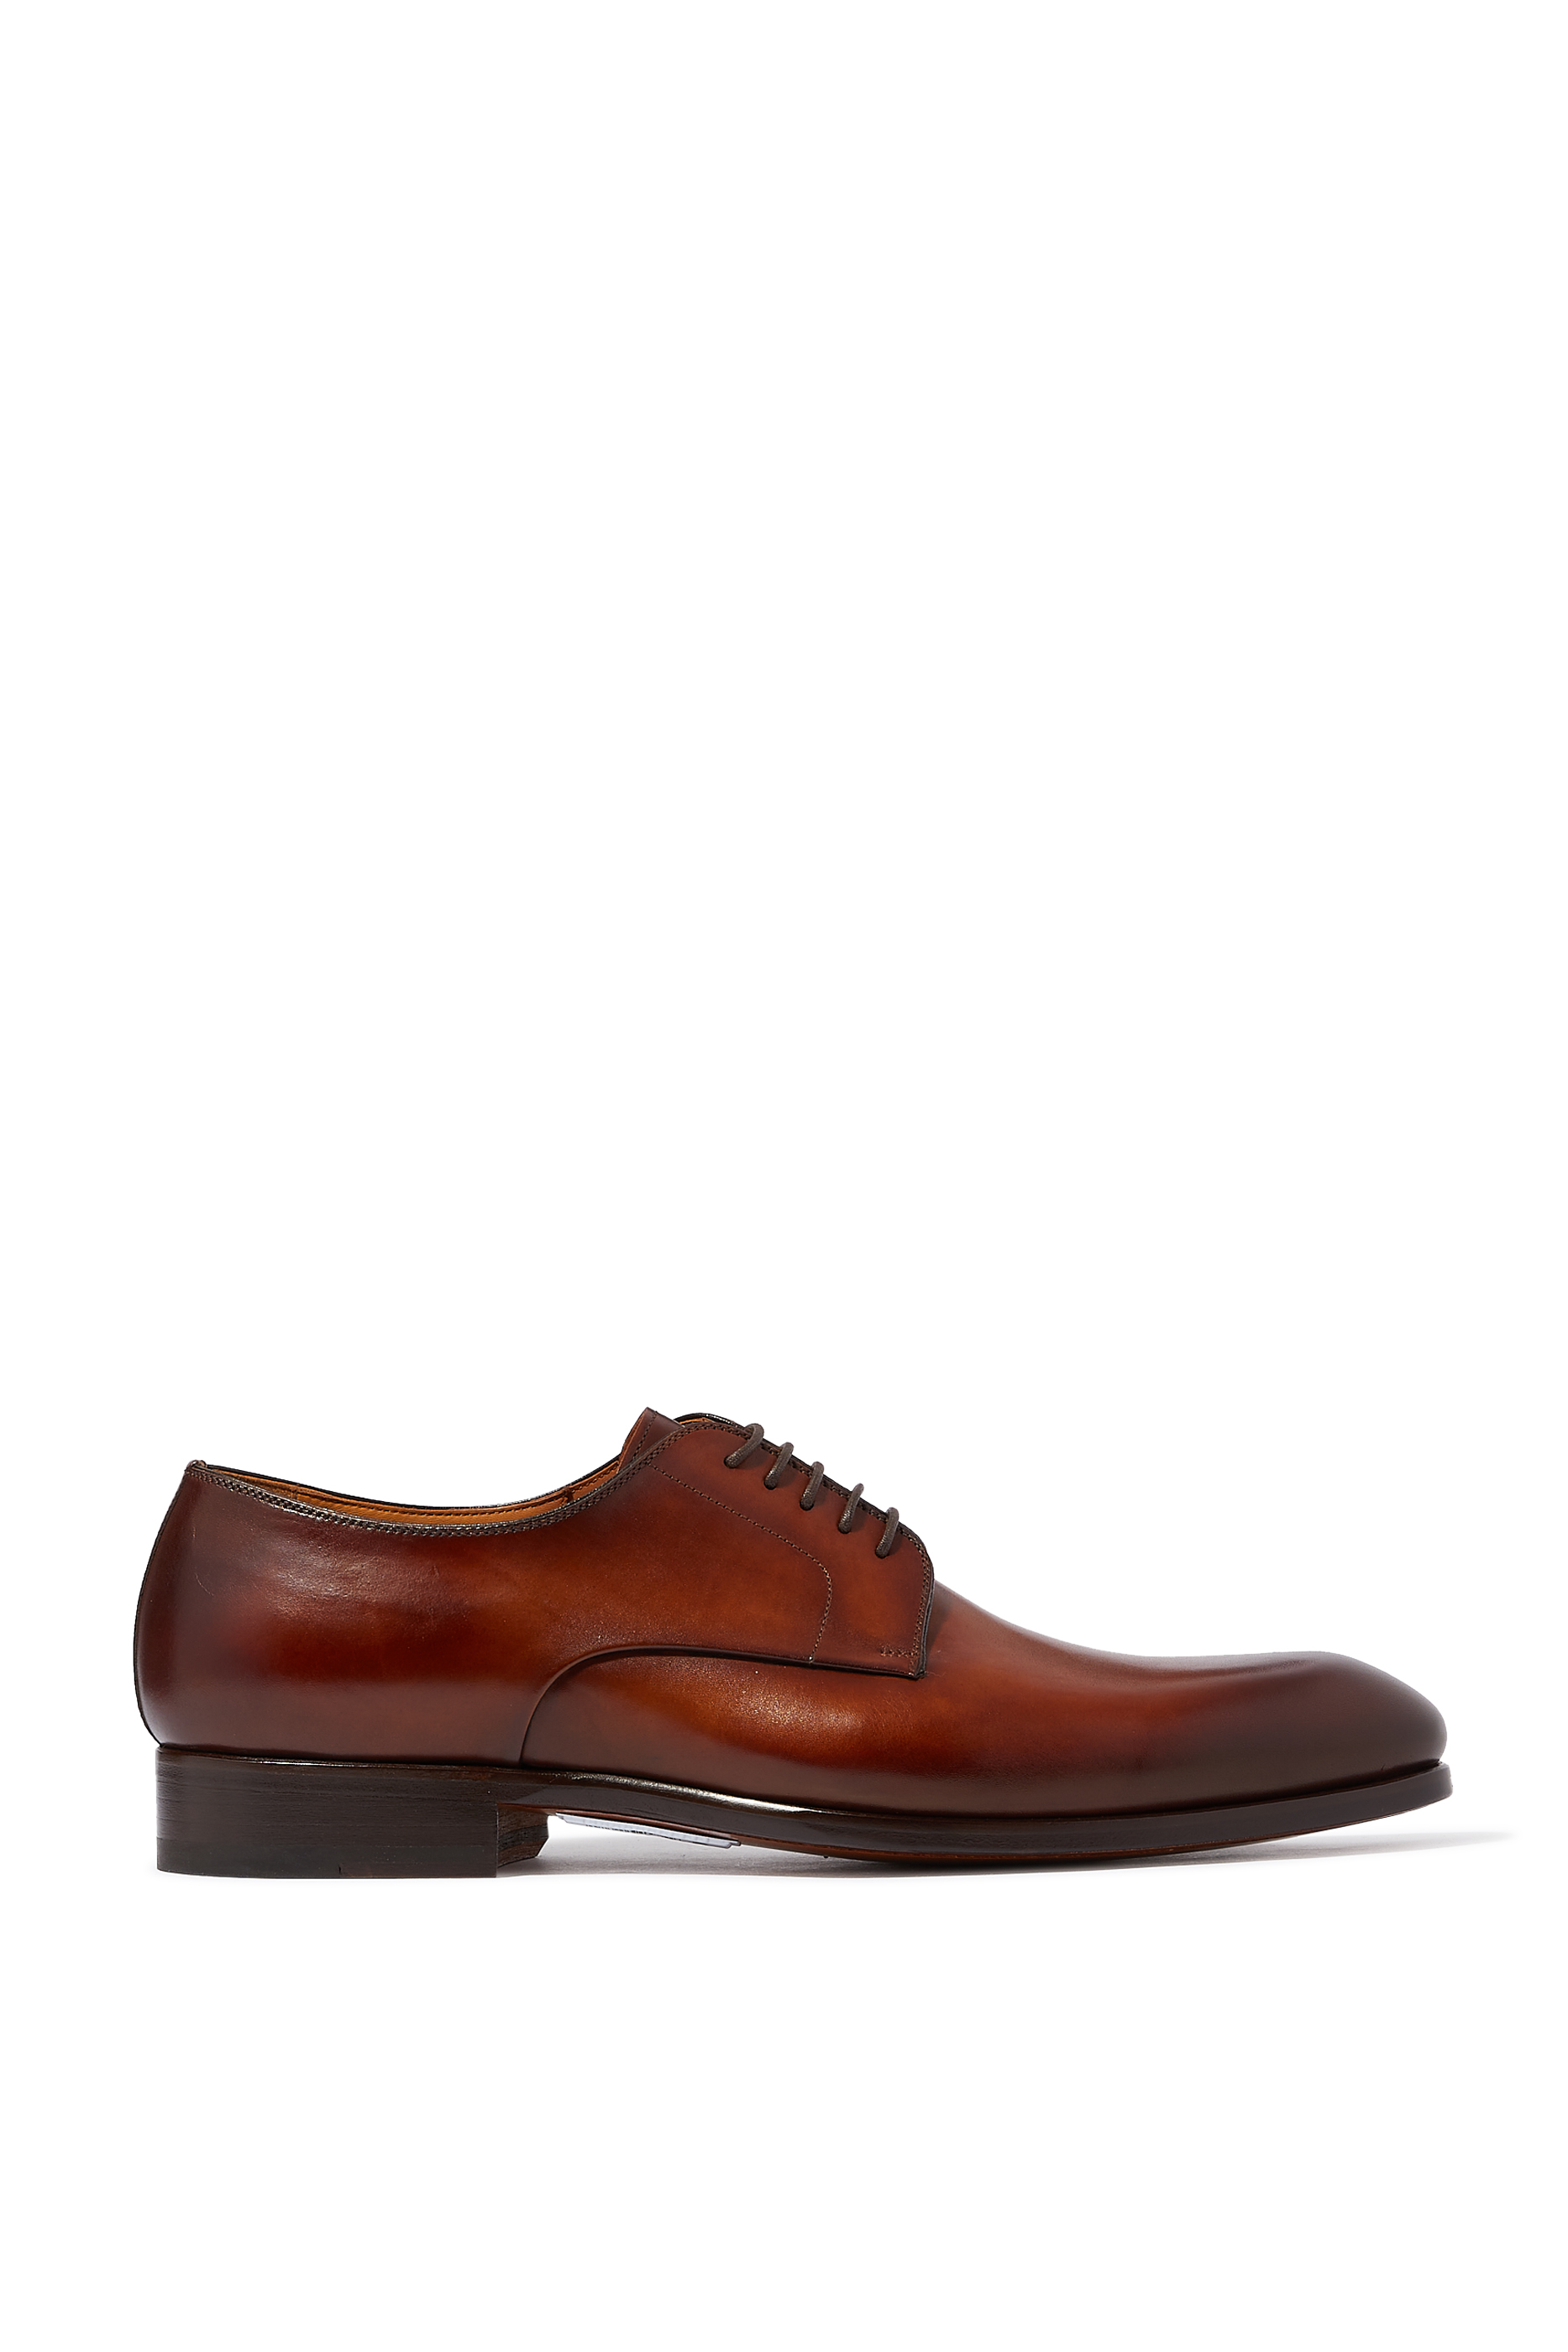 Buy Magnanni Andros Lace Up Shoes for Mens | Bloomingdale's Kuwait